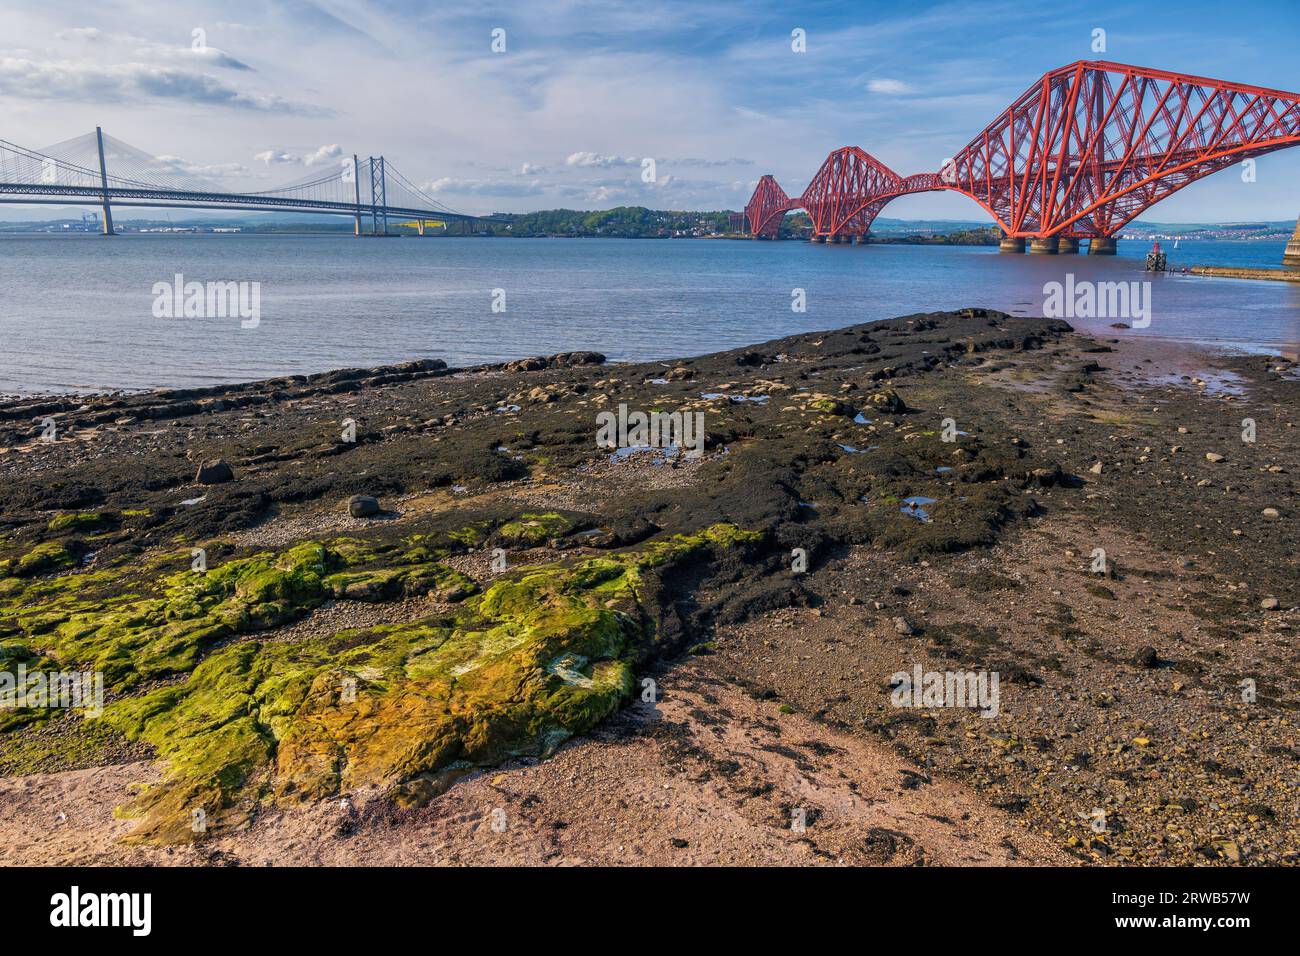 Firth of Forth estuary with Forth Bridge and Forth Road Bridge from the shore in South Queensferry, Scotland, UK. Stock Photo